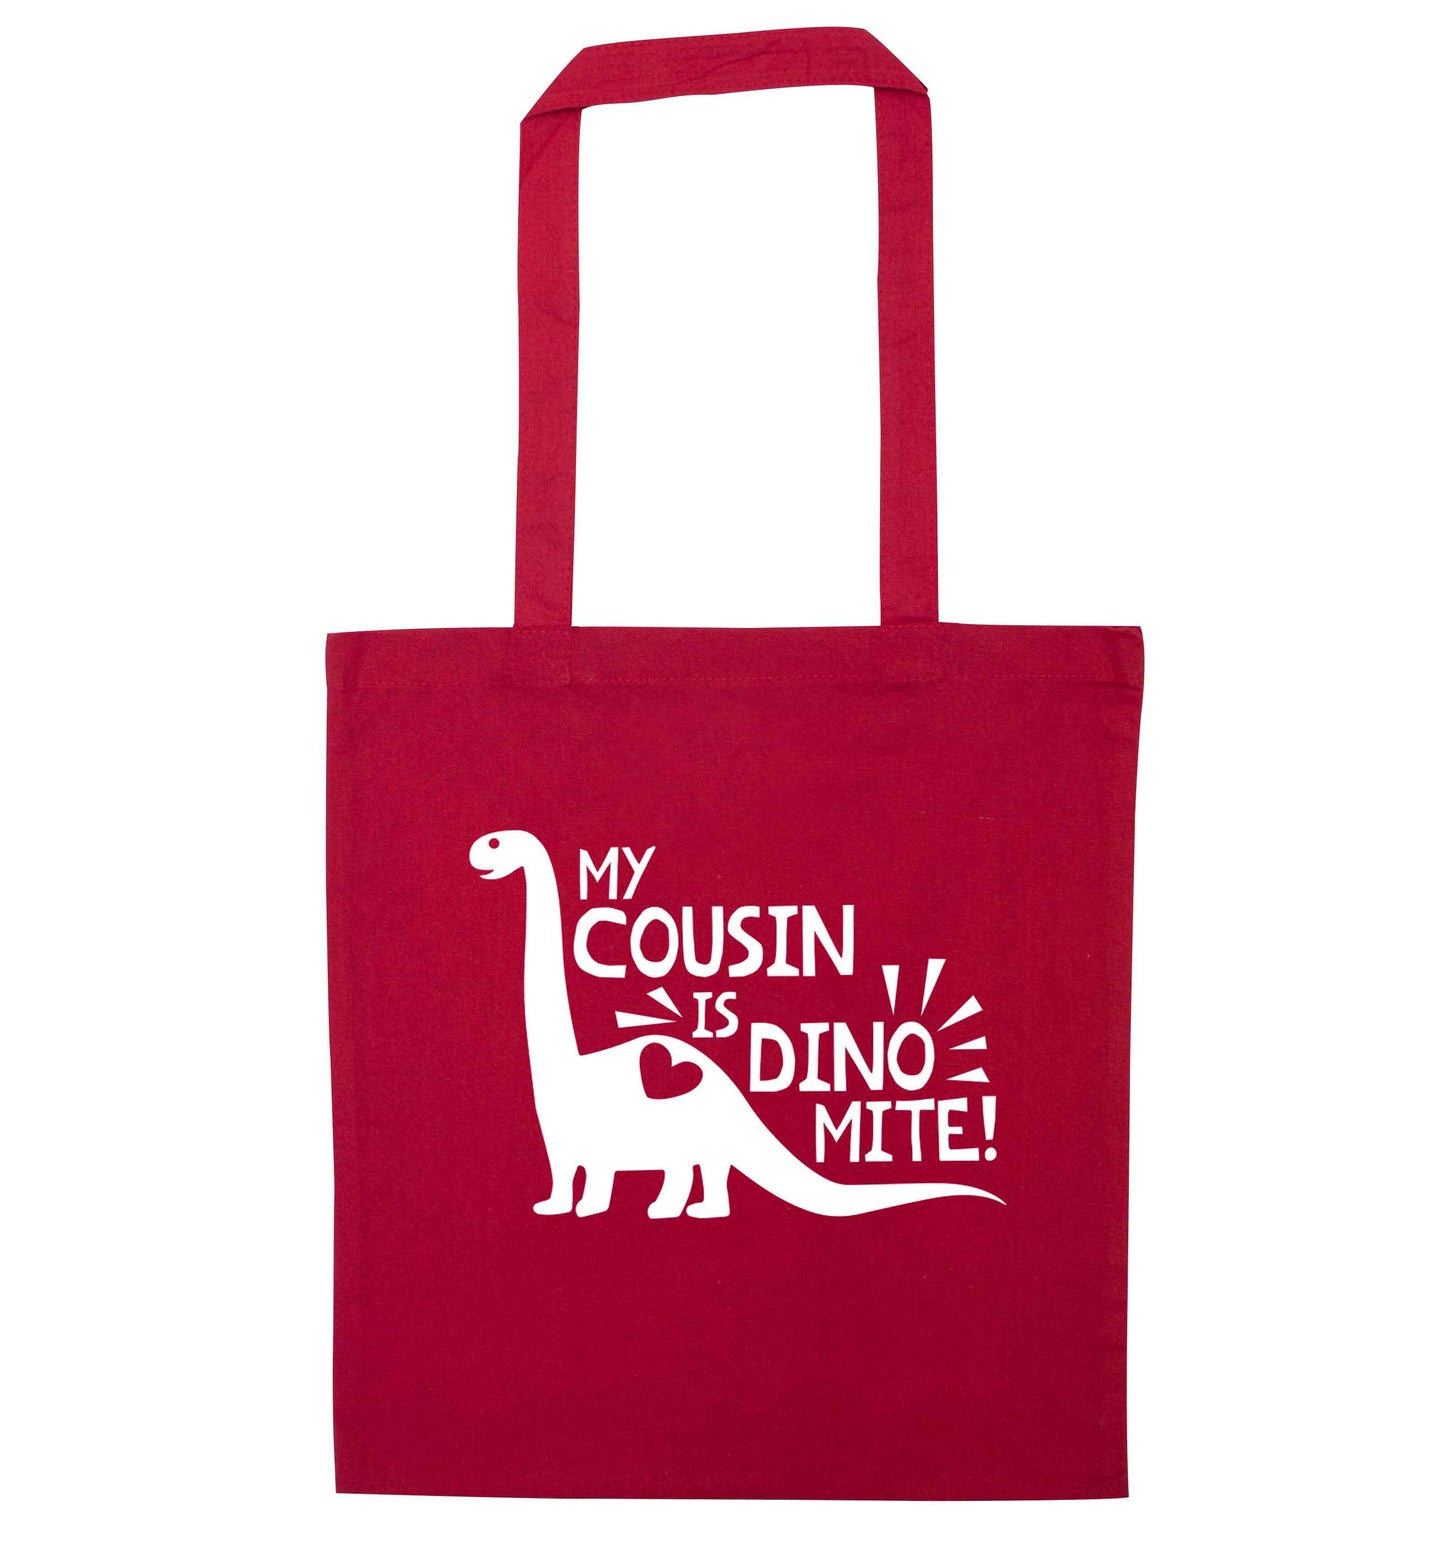 My cousin is dinomite! red tote bag